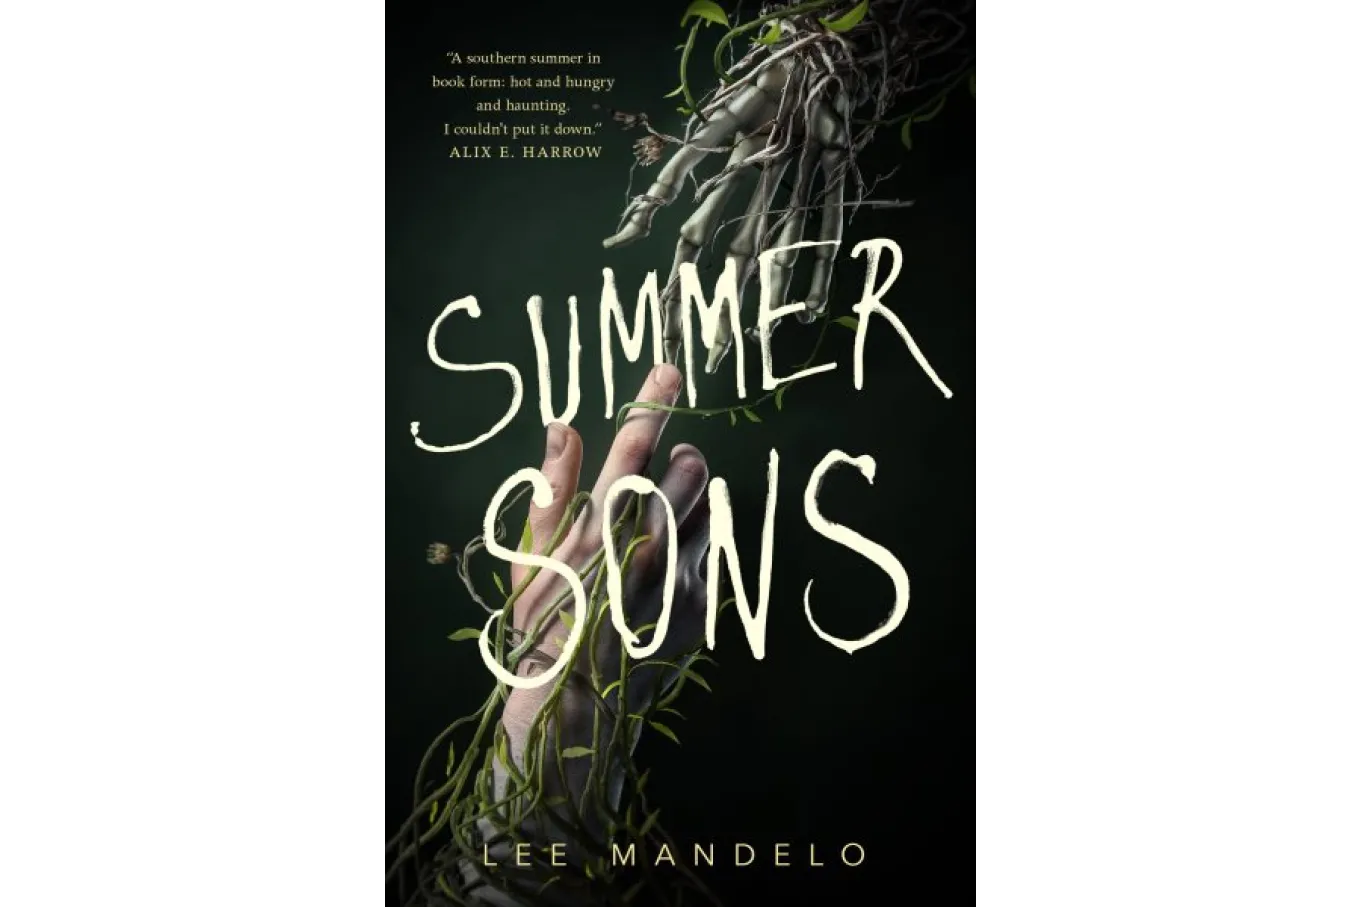 Cover image - a hand reaches up through grass as if from a body underground. A skeletal hand wrapped in dead vines reaches down to grasp it.